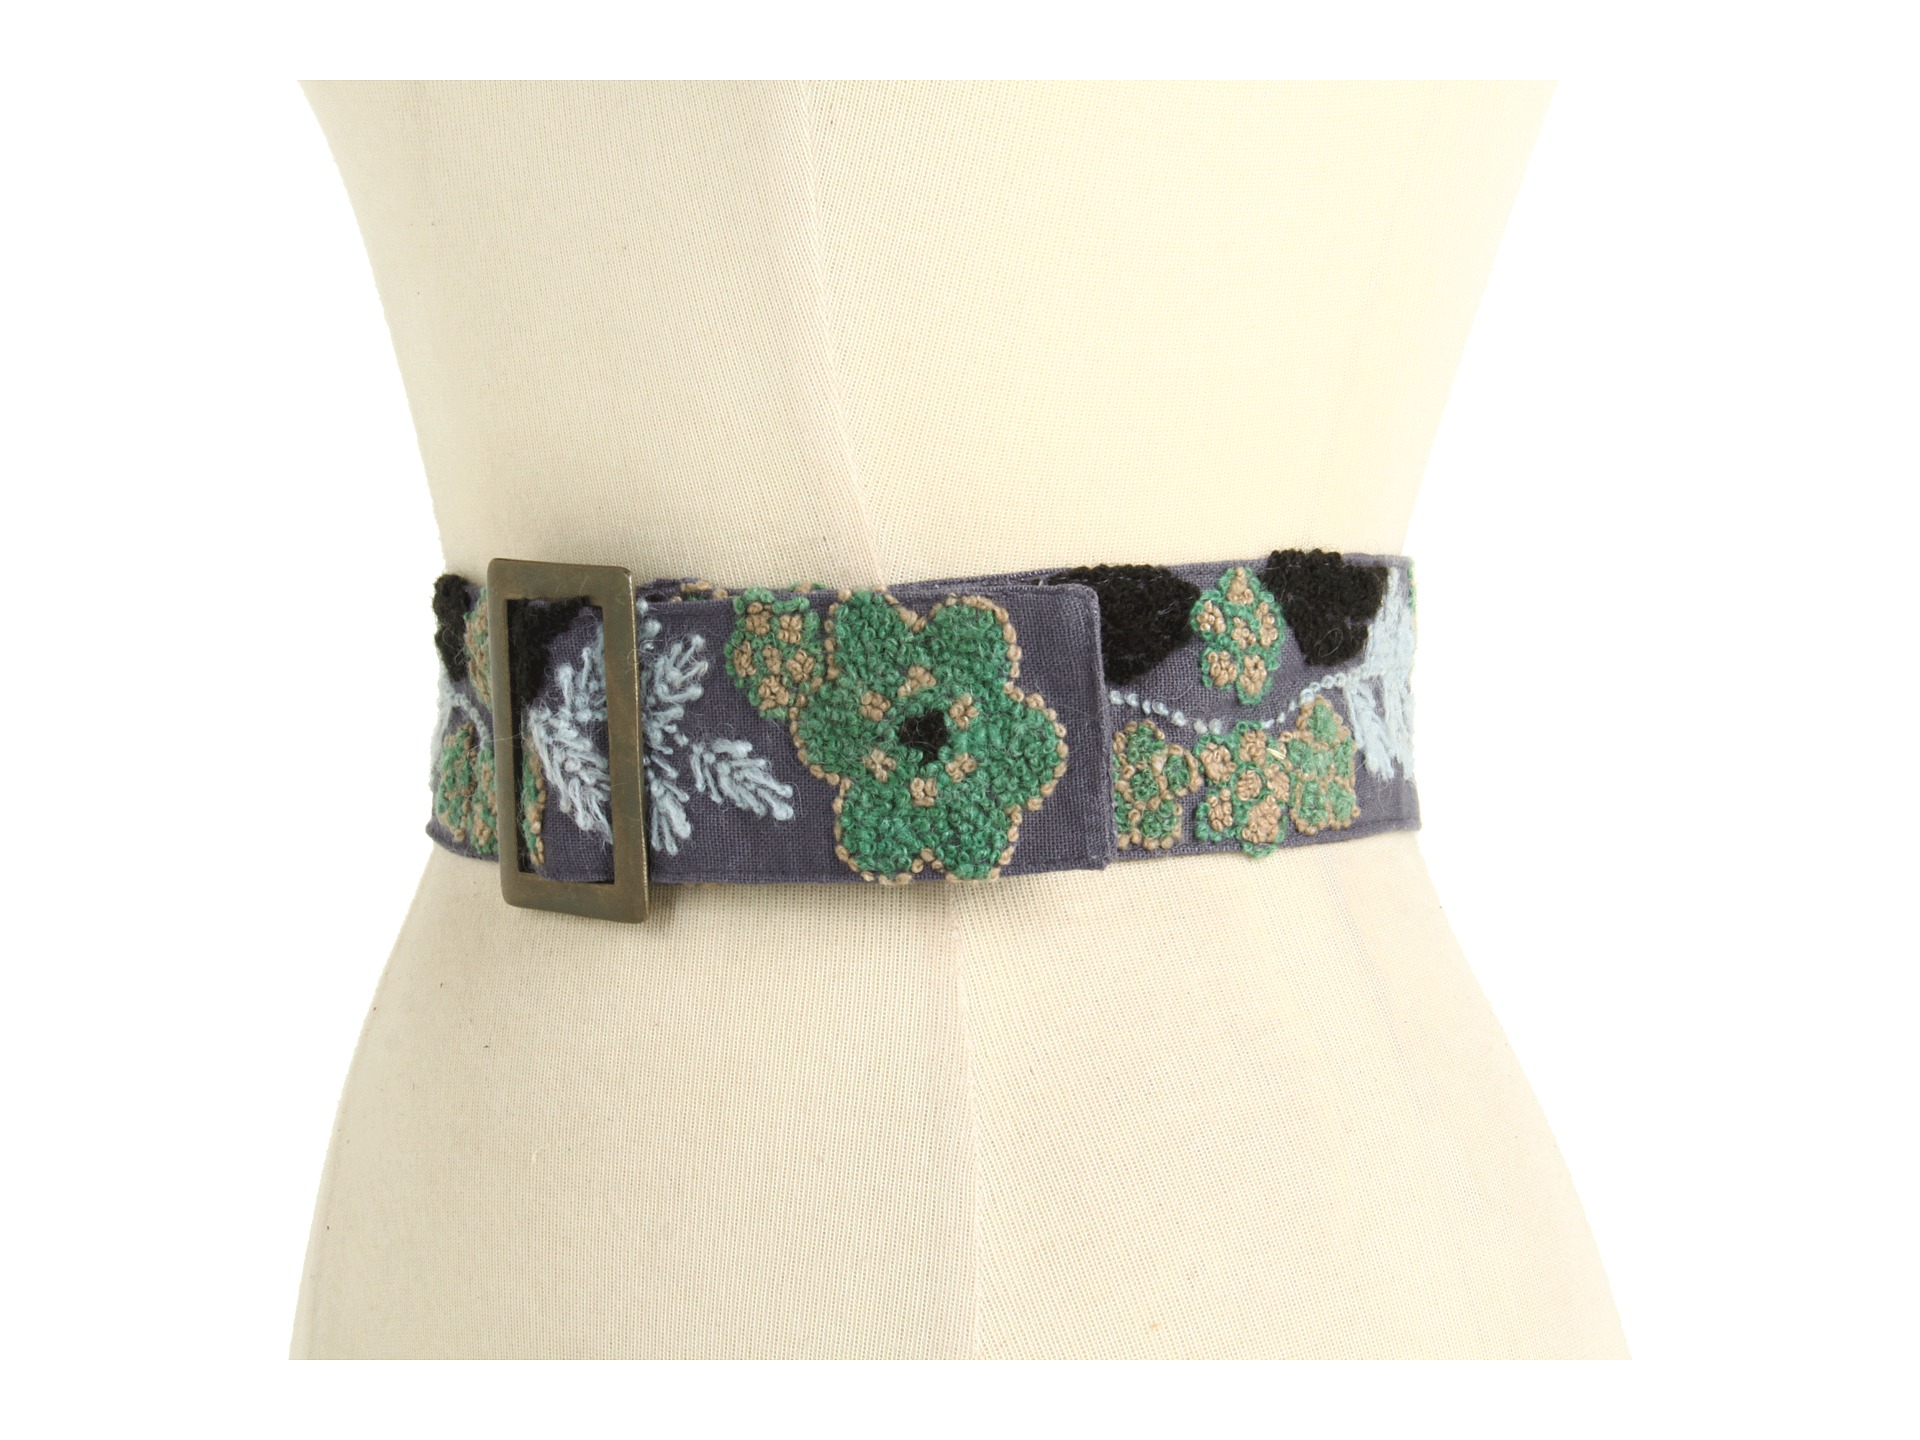 Prana Embroidered Wool Belt, Accessories, Women | Shipped Free at Zappos